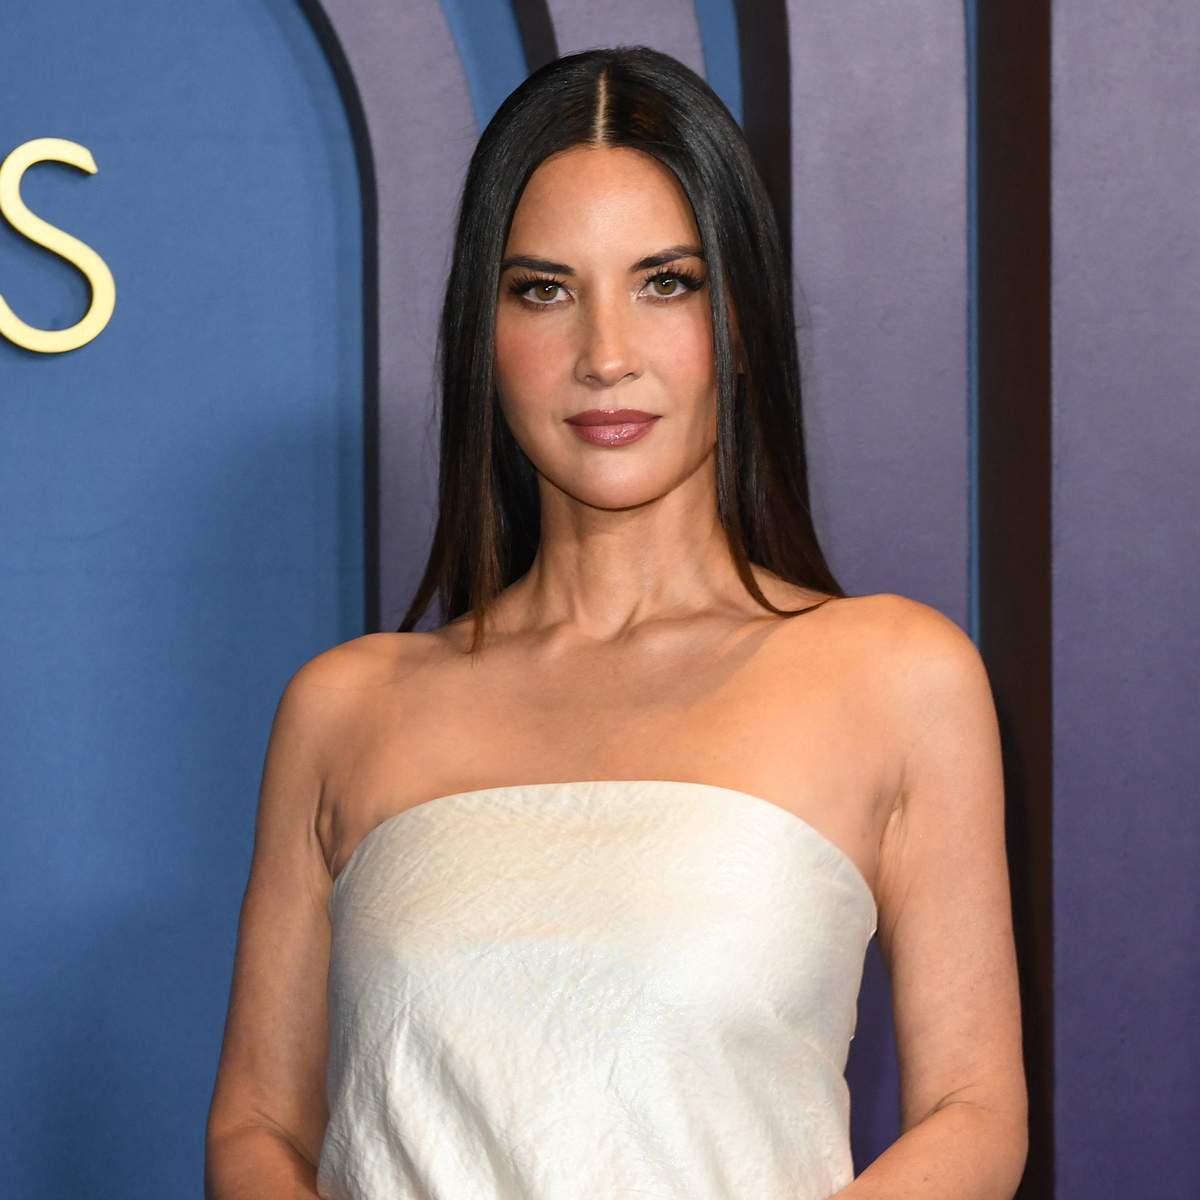 Olivia Munn Details Shock of Cancer Diagnosis After Clean Mammography 3 Months Earlier